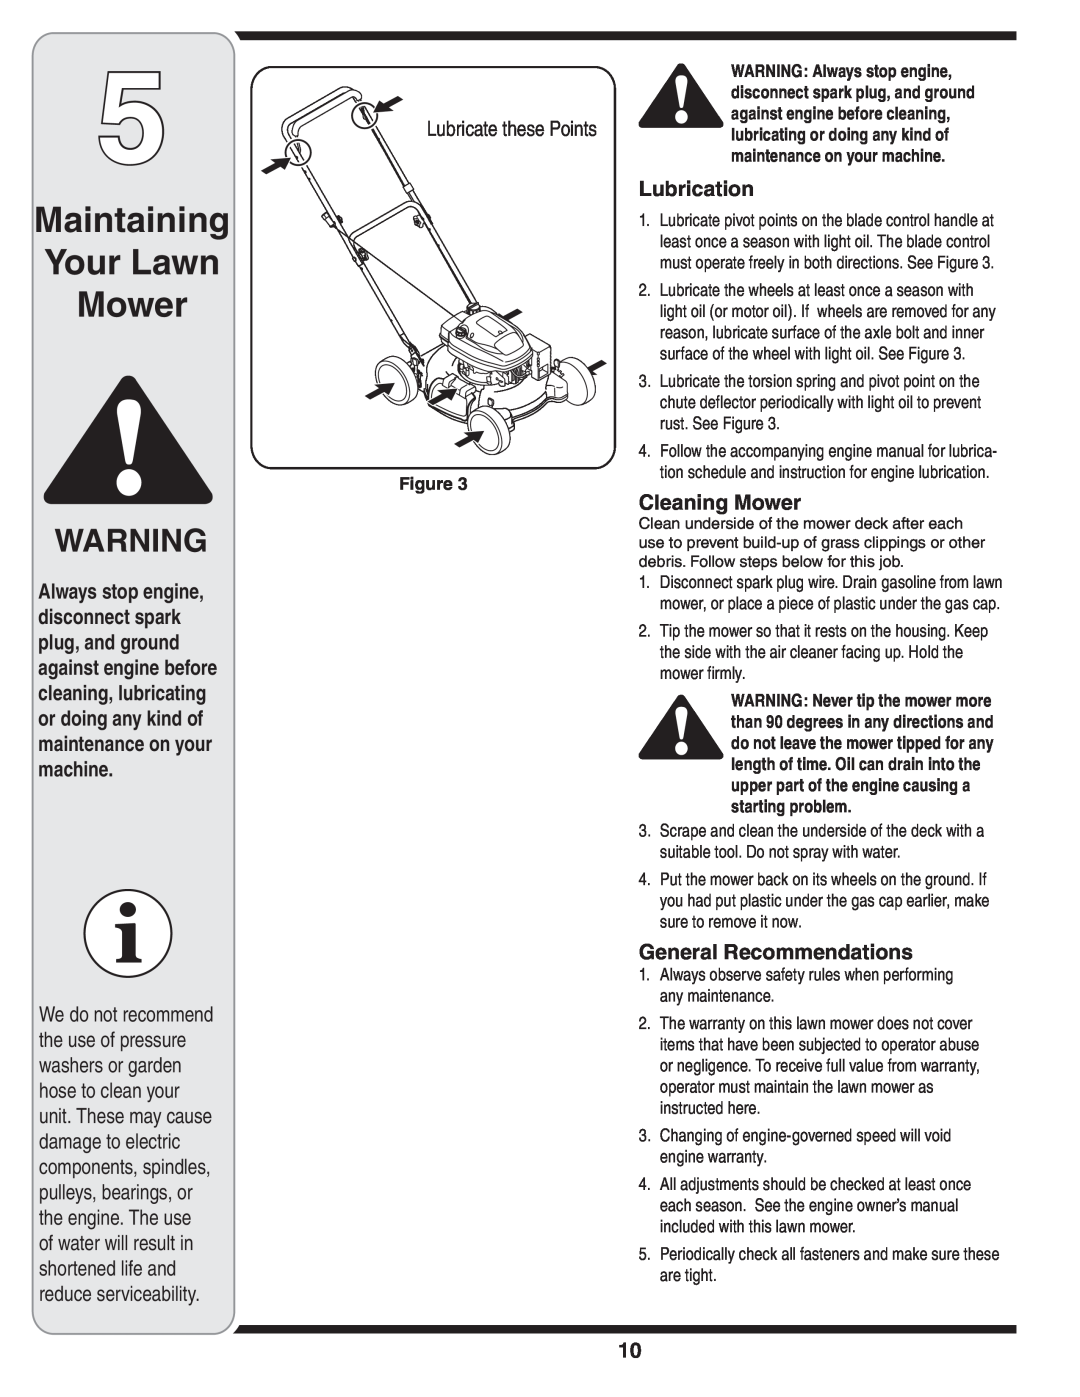 Tecumseh 105 Maintaining Your Lawn Mower, Lubrication, Cleaning Mower, General Recommendations, Lubricate these Points 